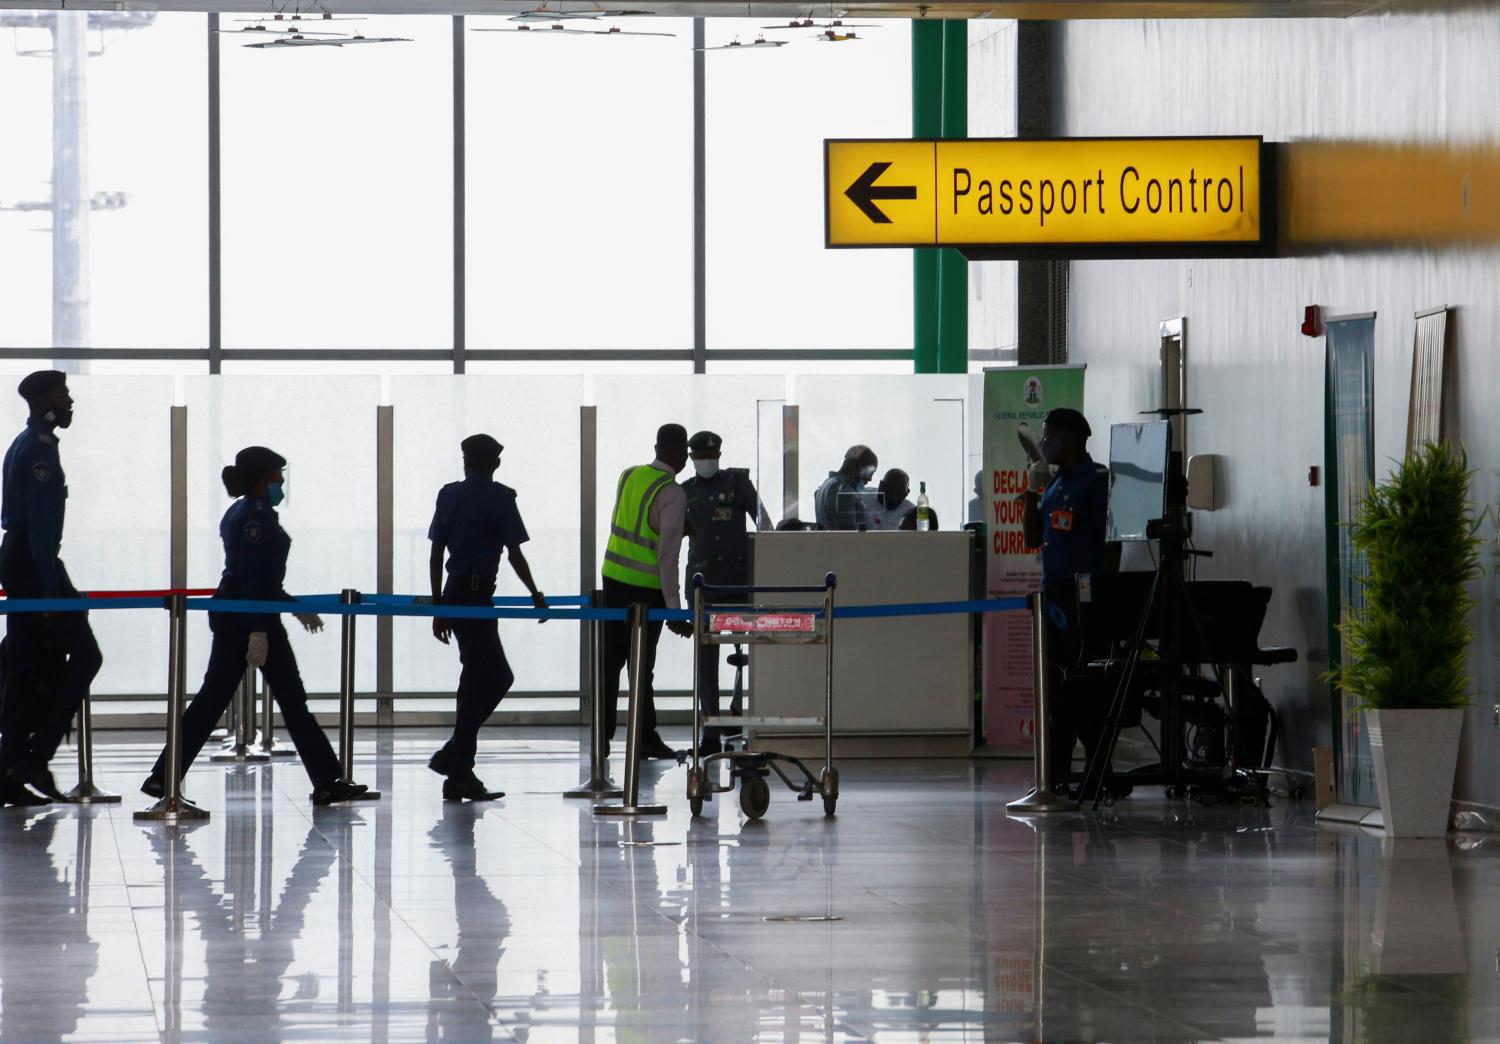 Security officers are seen at the passport control point at the Nnamdi Azikiwe international airport in Abuja, Nigeria September 7, 2020. REUTERS/Afolabi Sotunde